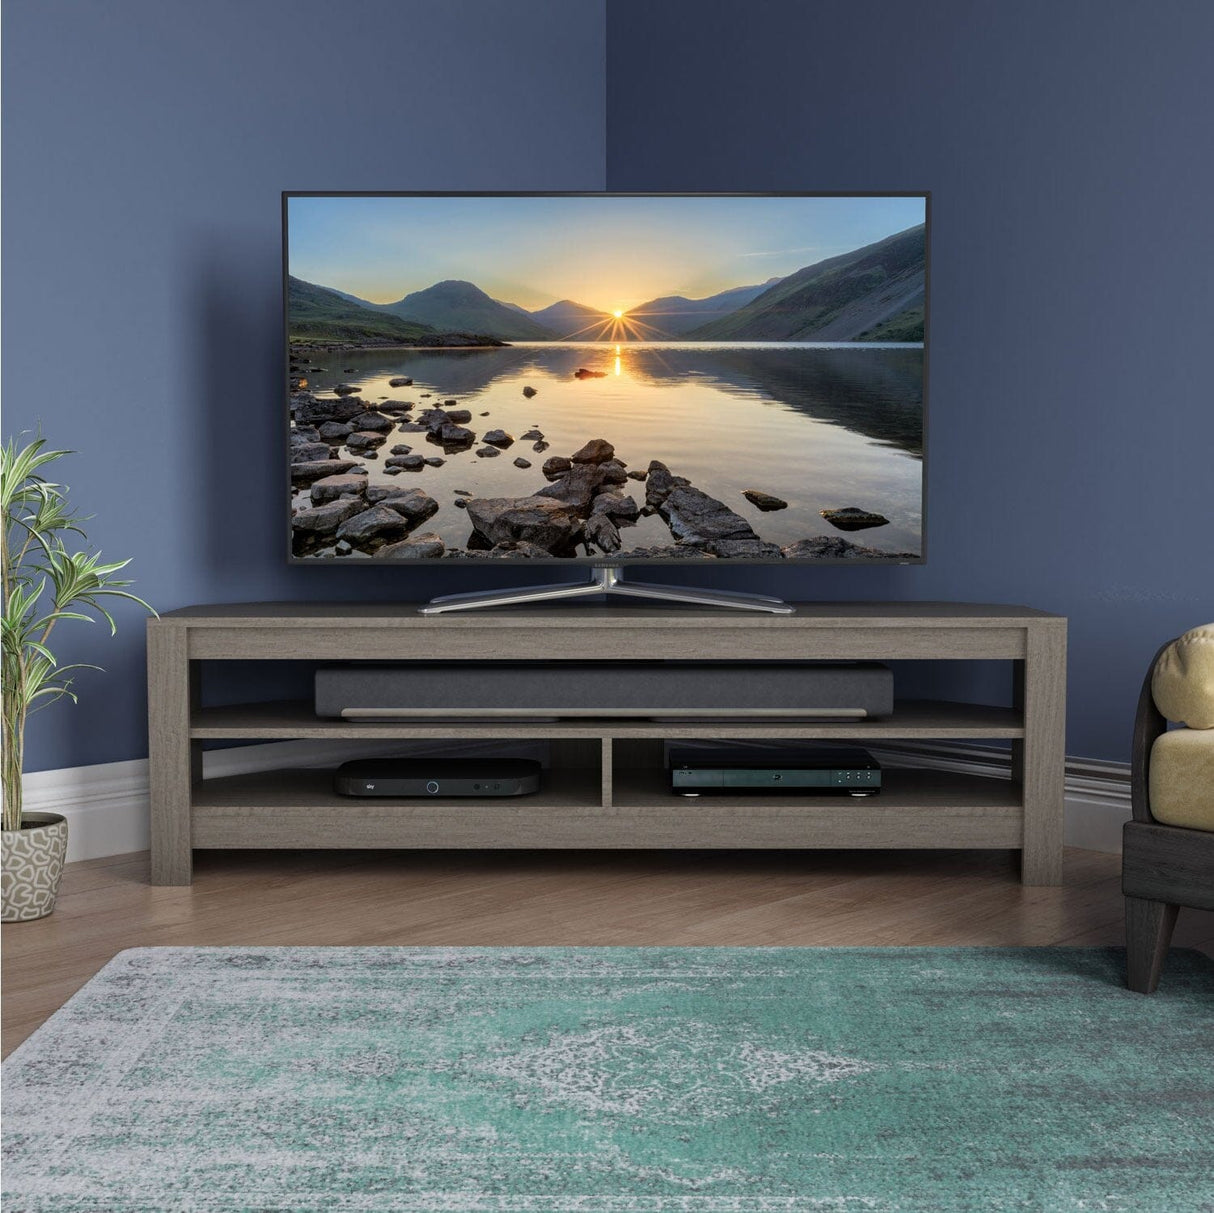 Techlink CA140GRE Calibre Flat TV Stand in Grey Oak suits Up To 65" TVs